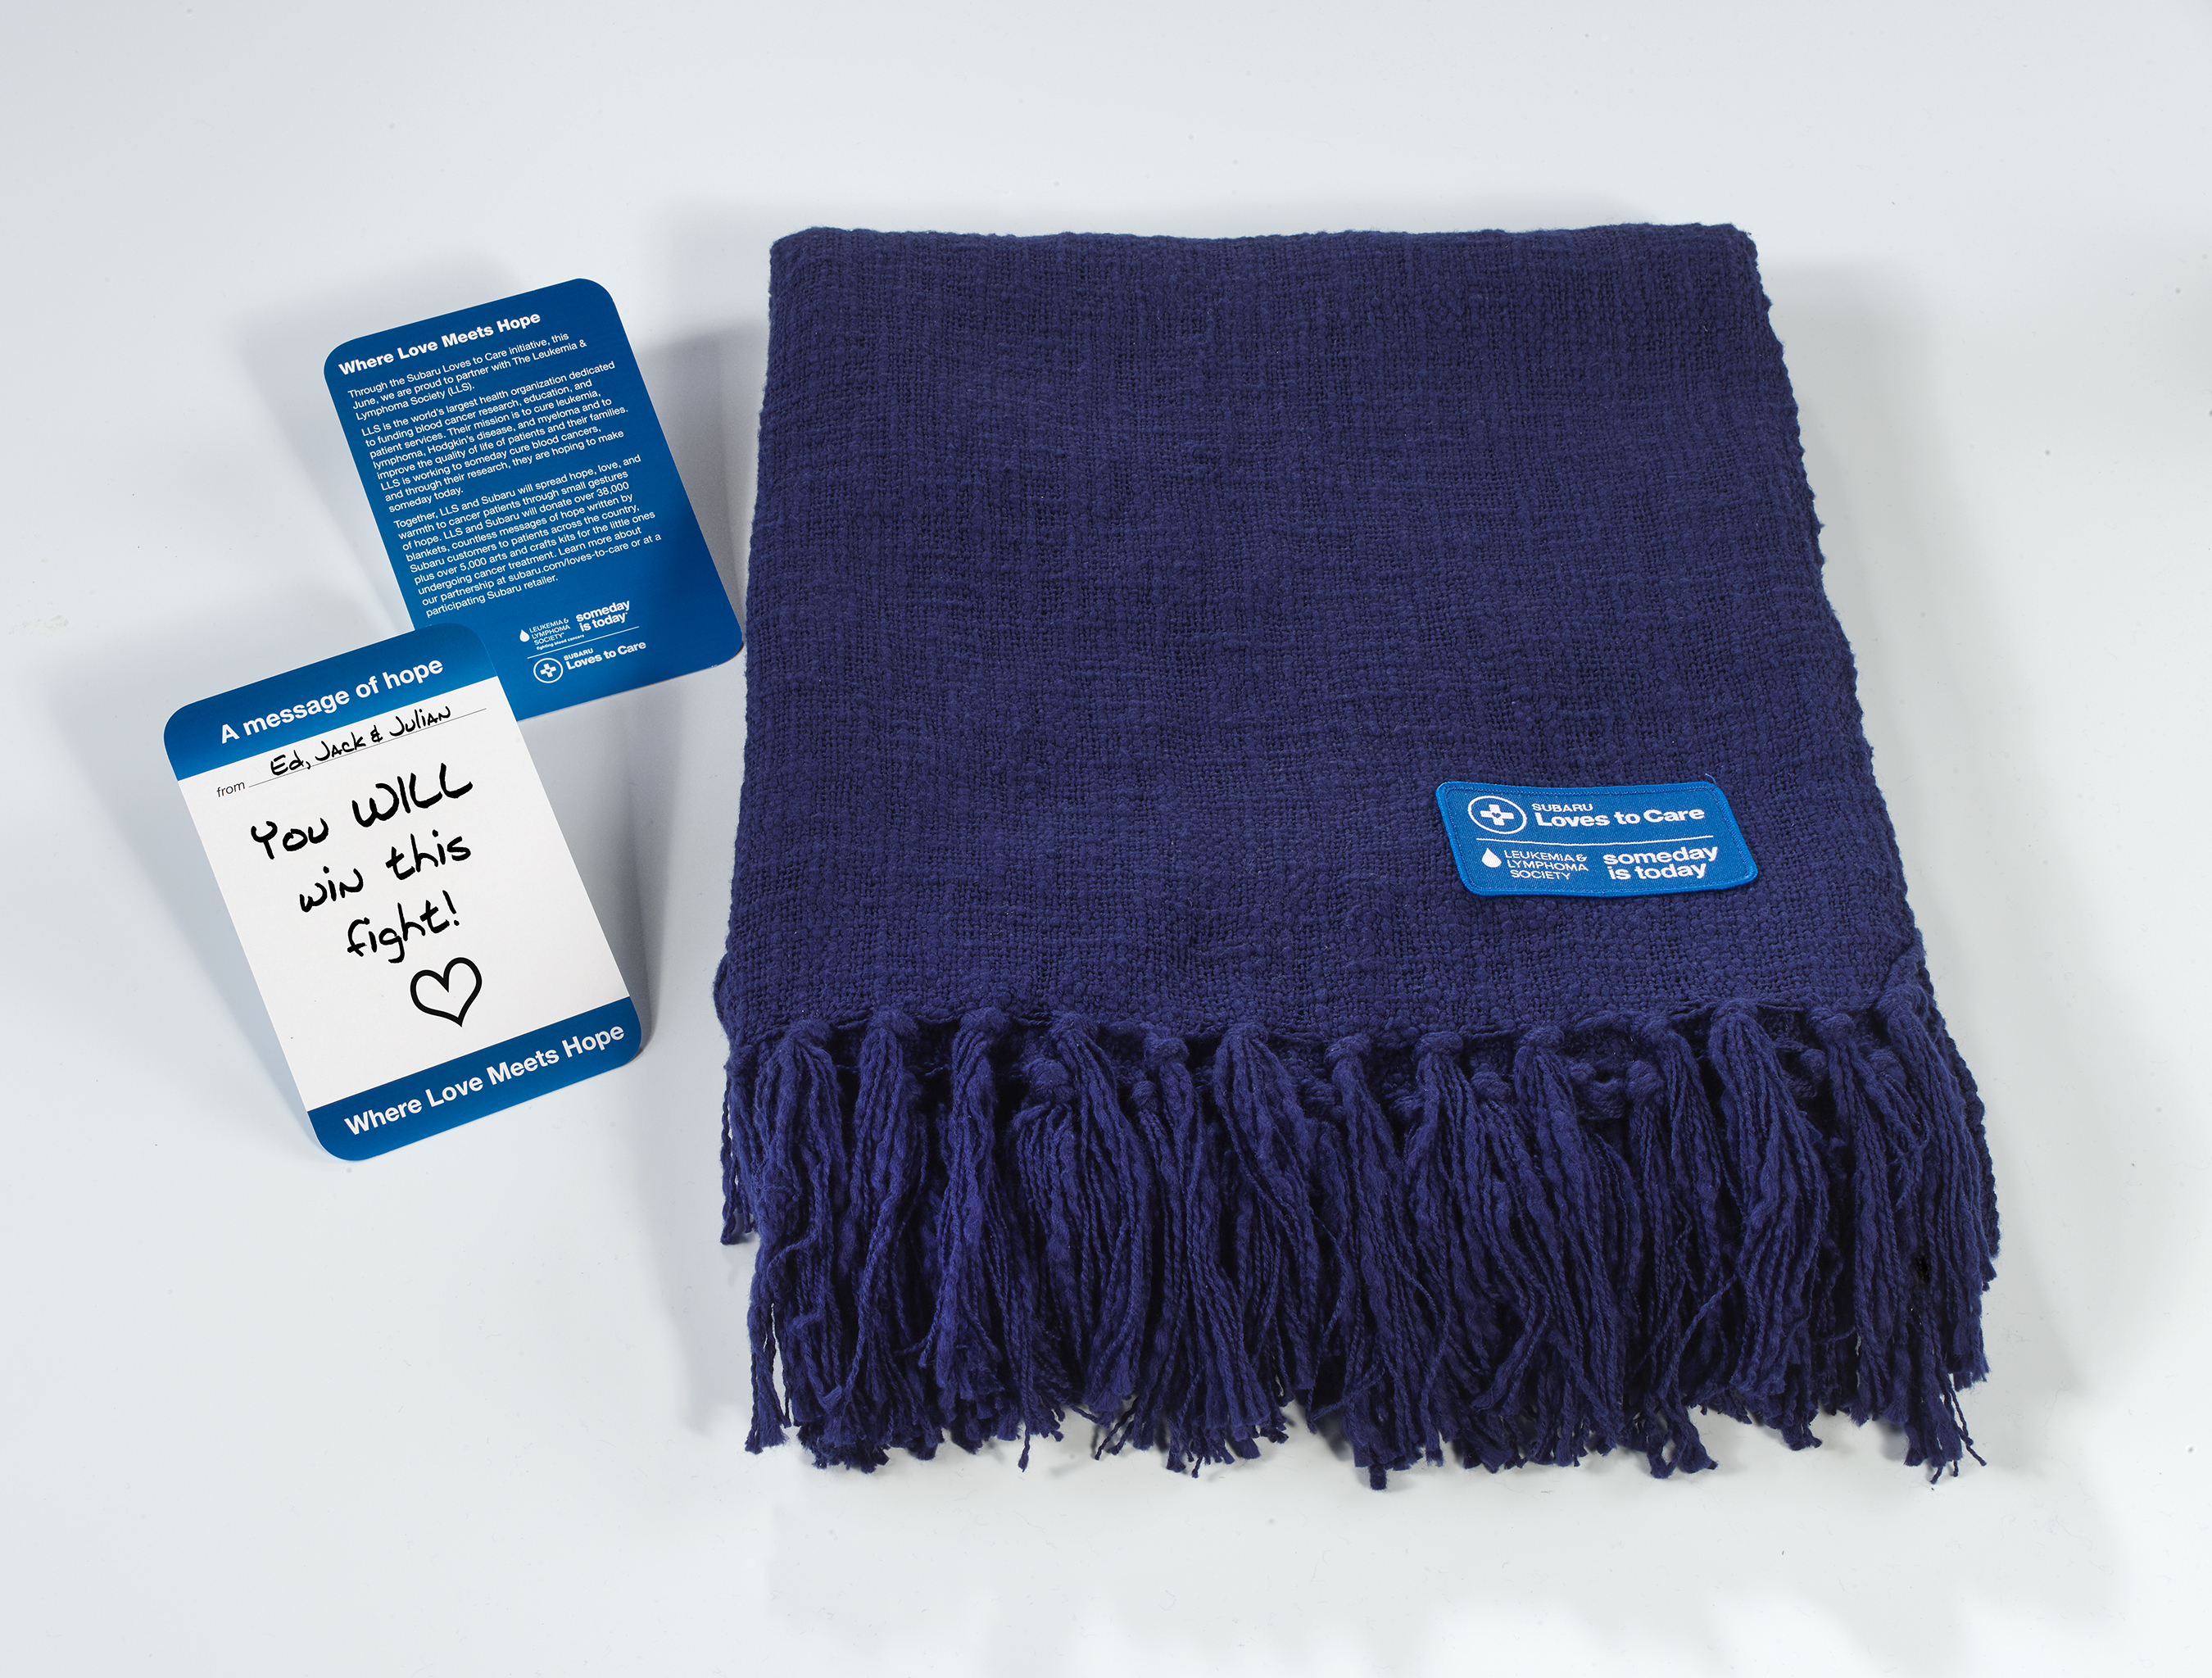 Subaru visitors can share personalized messages of hope to cancer patients in their communities, which will be delivered alongside blankets that provide comfort and warmth.